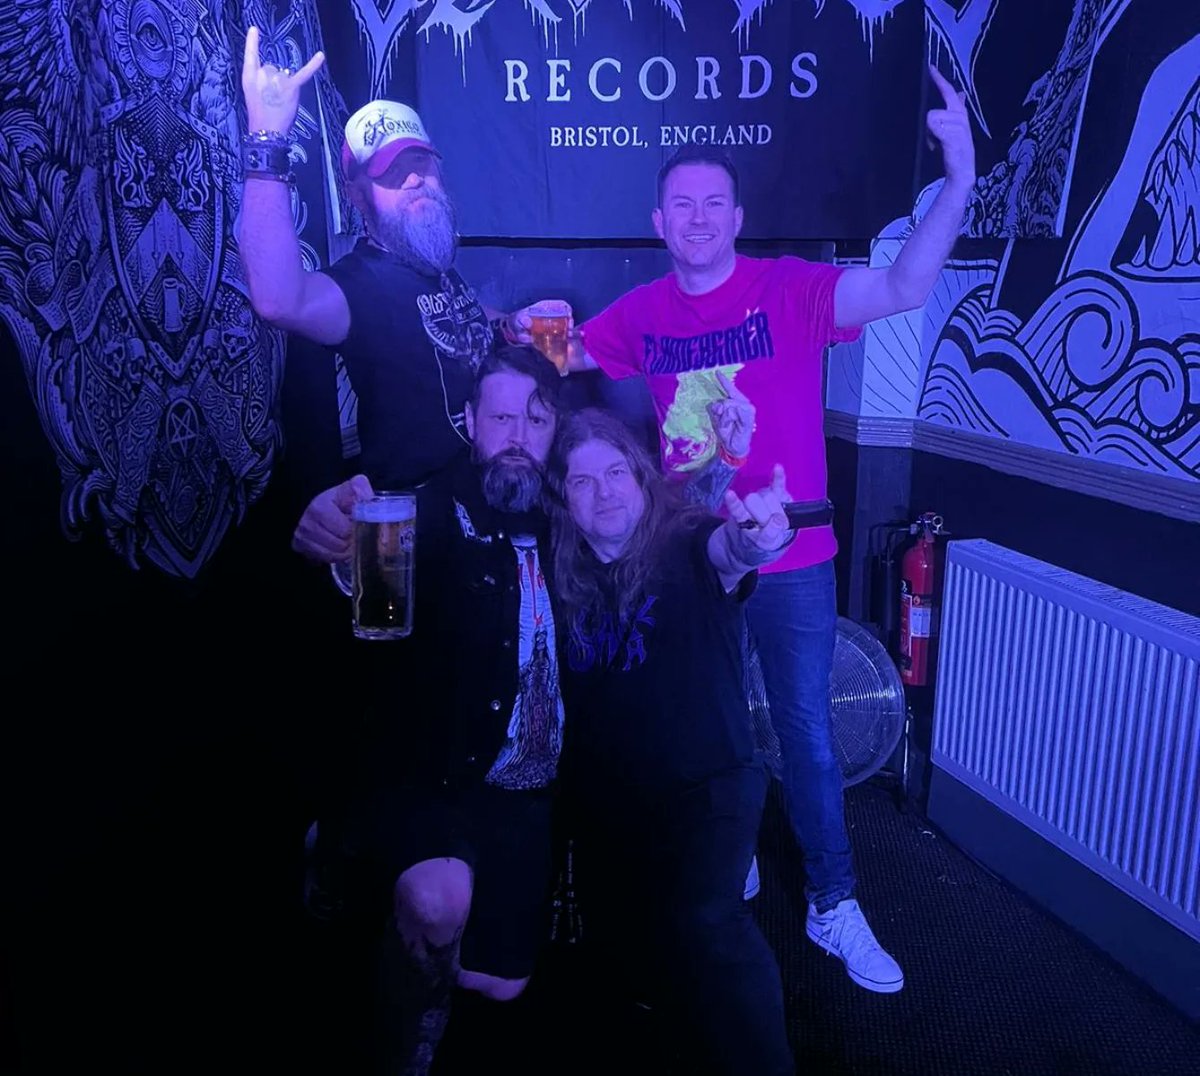 So last week we were in Bristol for the Black City Records Weekender... We recorded a drunk episode 'reviewing' the weekend at 2am Sunday... The sound, unfortunately, is shit. But... It can just be heard. Does anyone actually want to hear it? If so, it'll go up 🤣 #metaltwitter